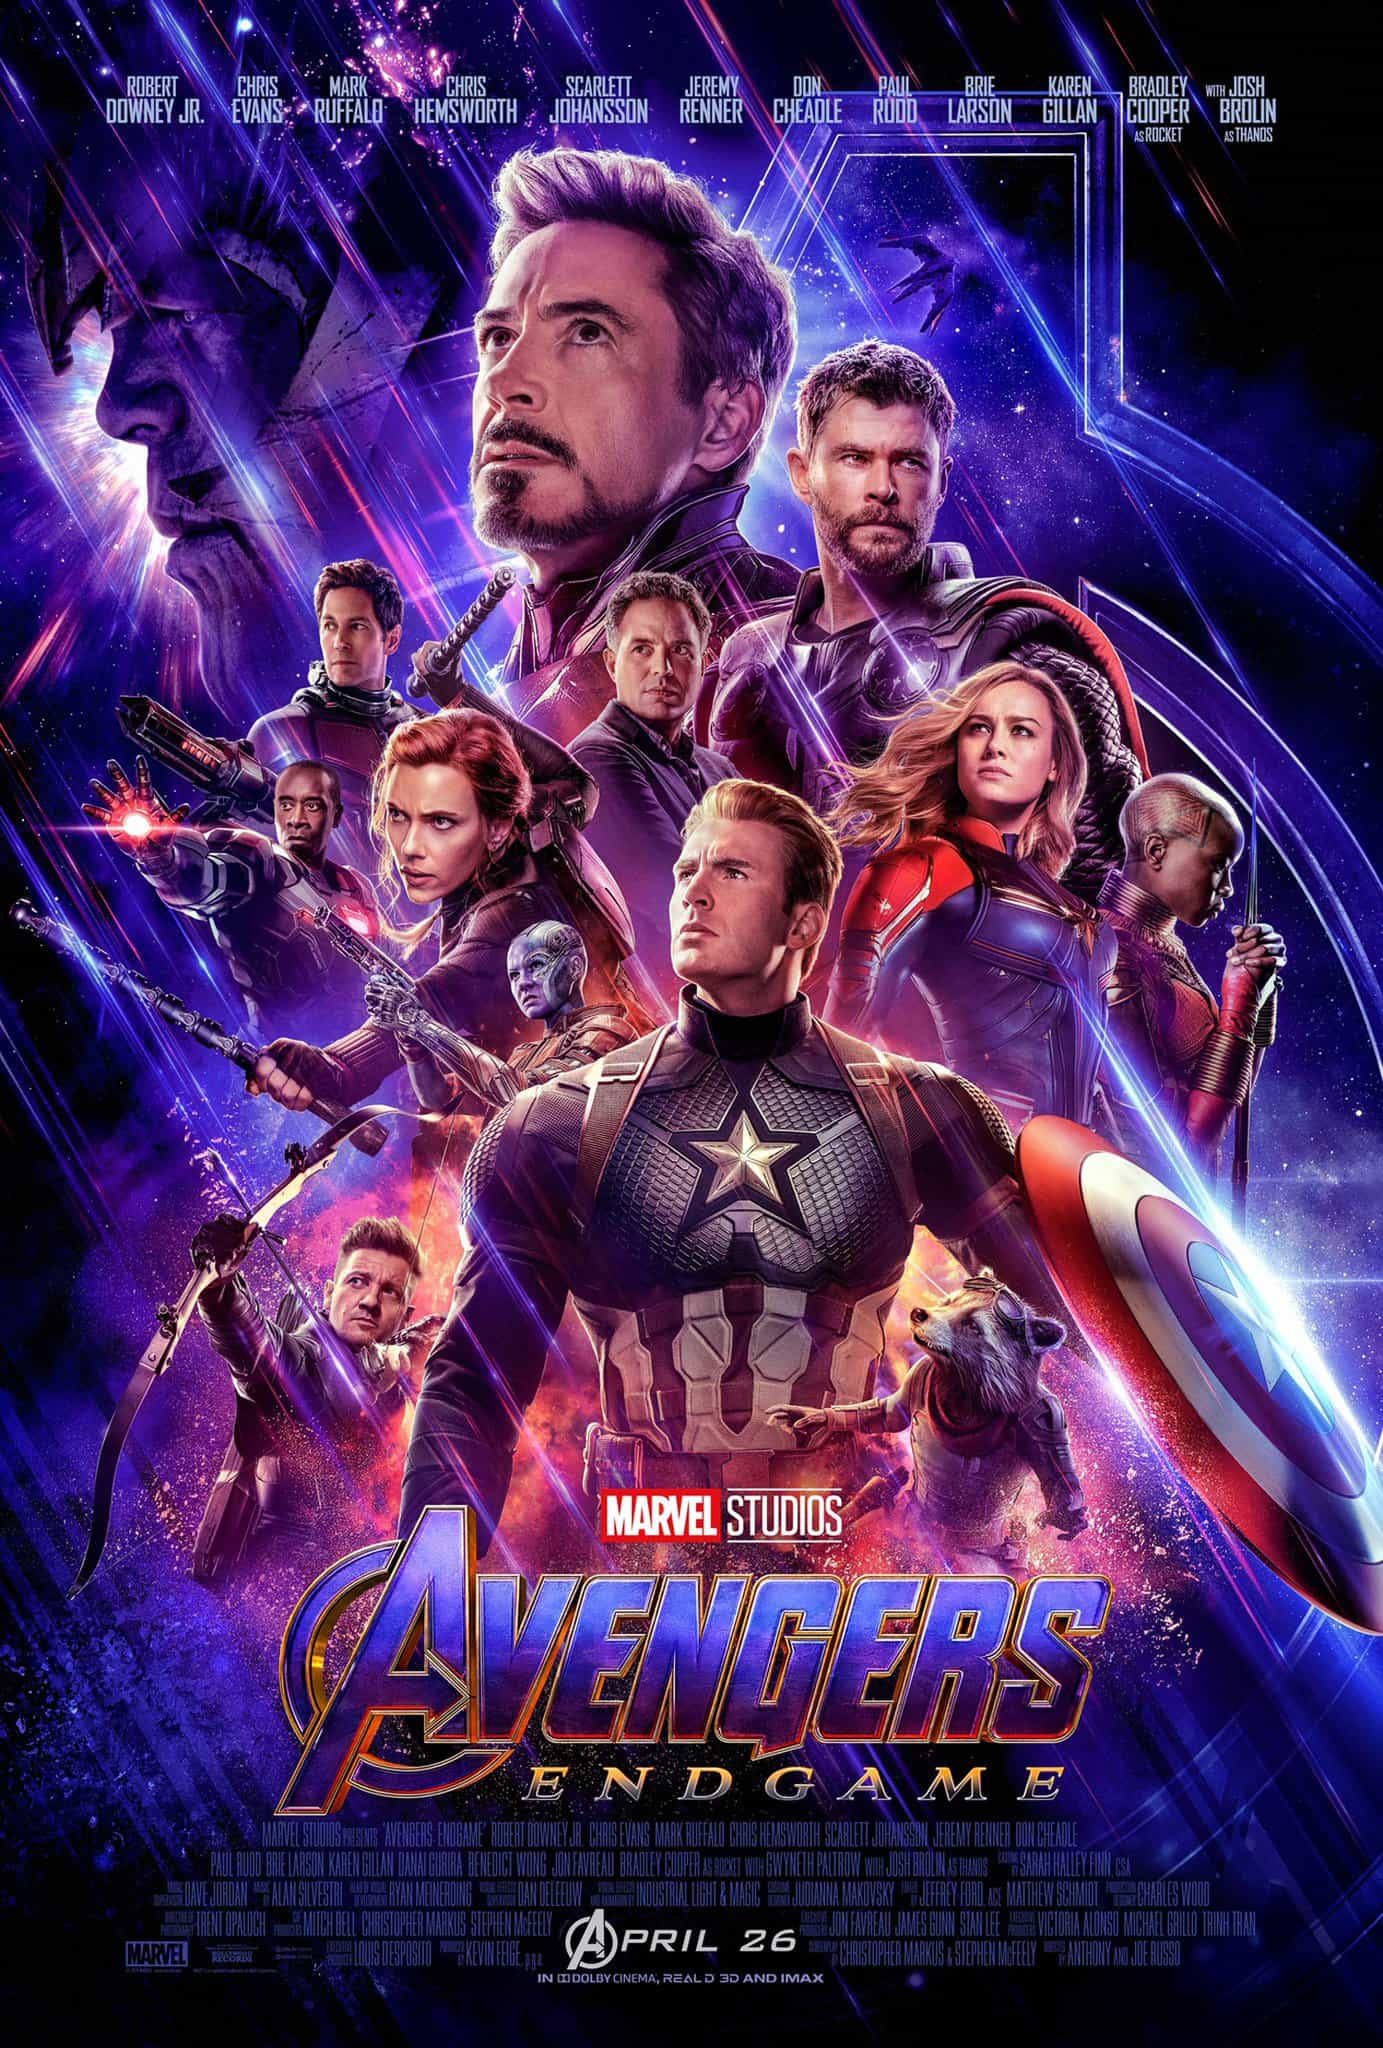 US Box Office Analysis Weekend 26 - 28 April 2019:  Avengers Endgame beats expectation and smashes the US opening weekend record with $350 million